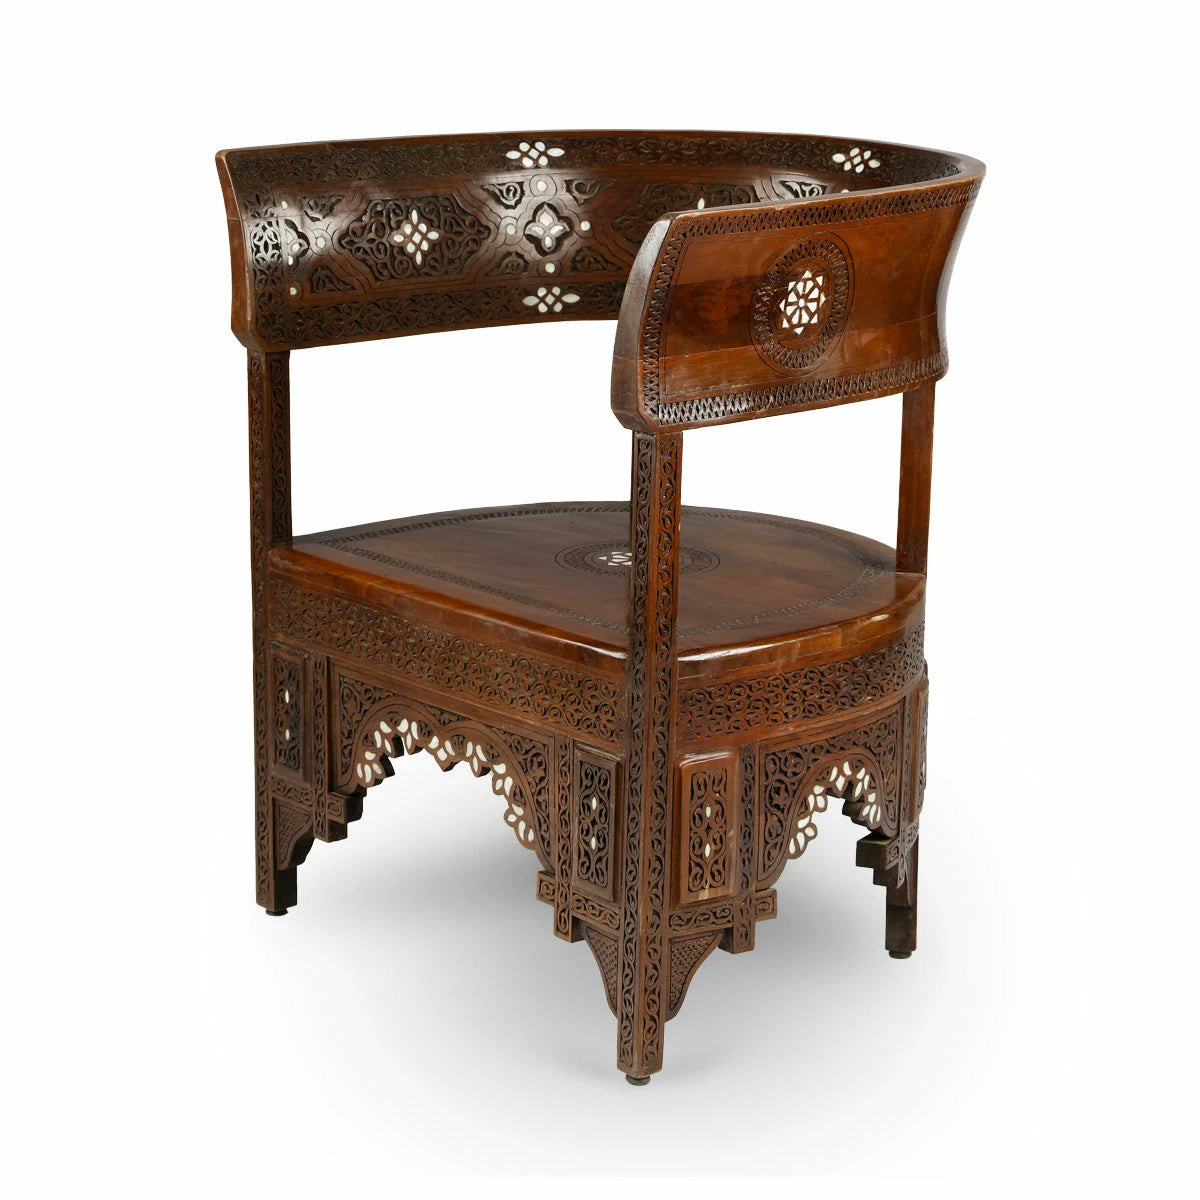 Syrian Bench with intricate handmade carvings and inlays in traditional motifs